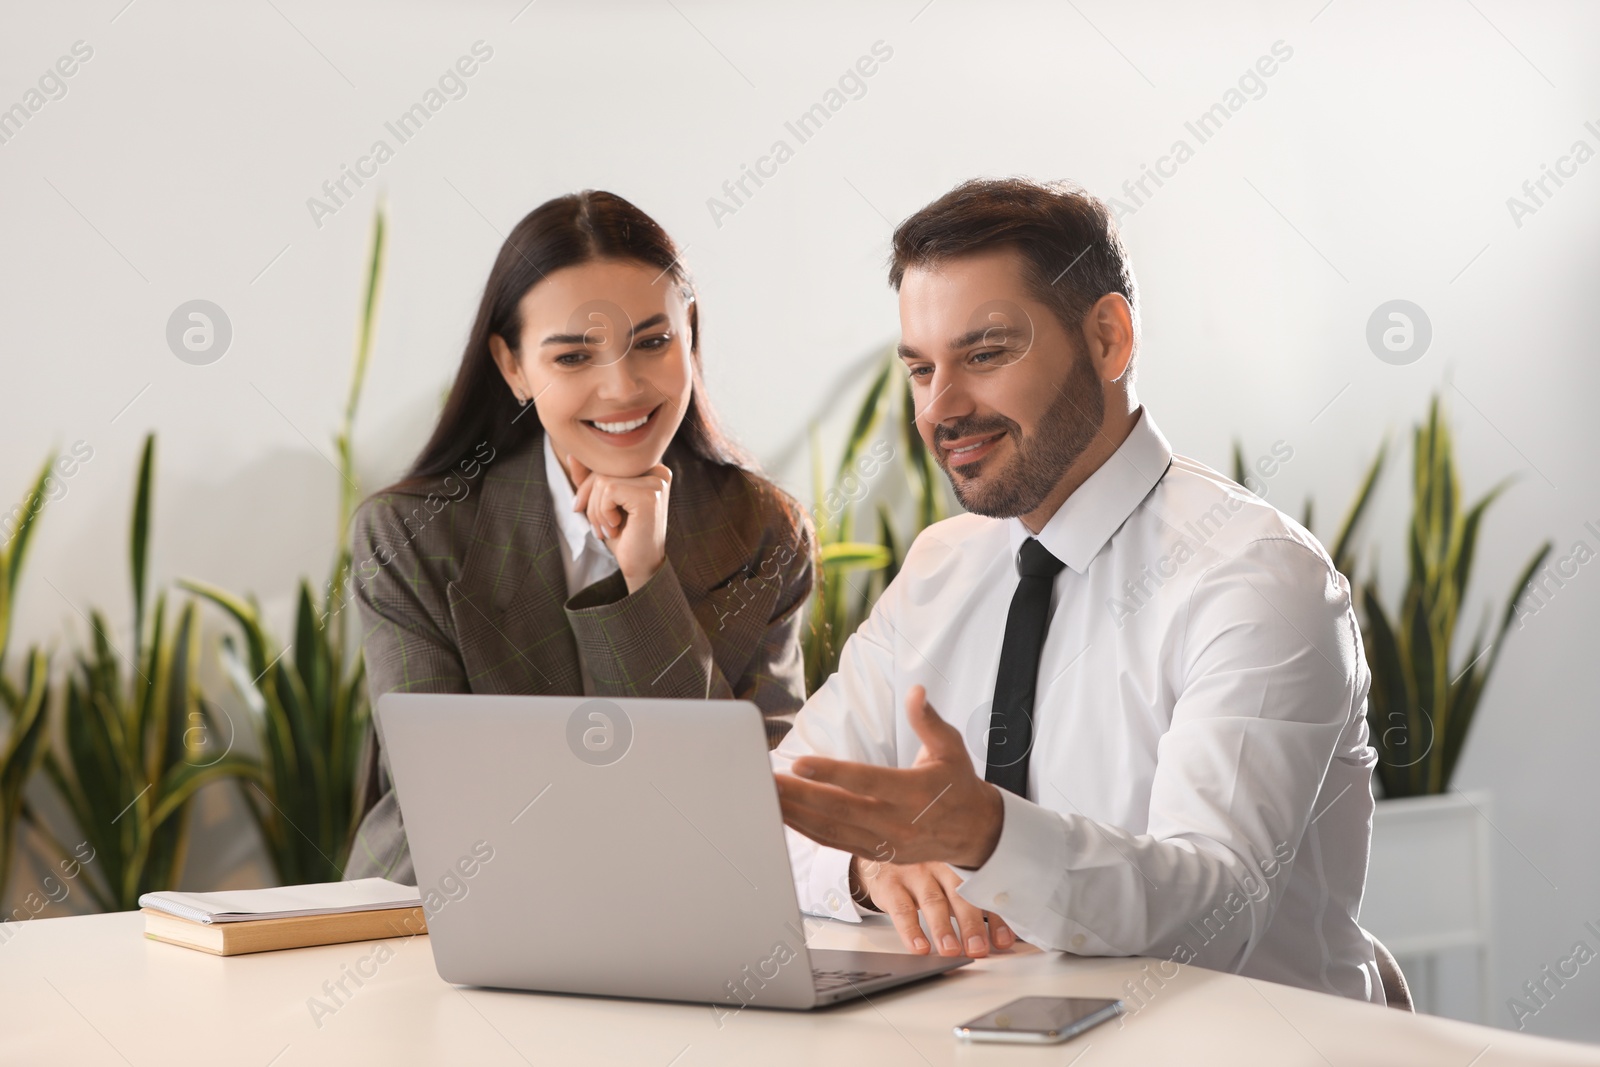 Photo of Colleagues working on laptop at desk in office